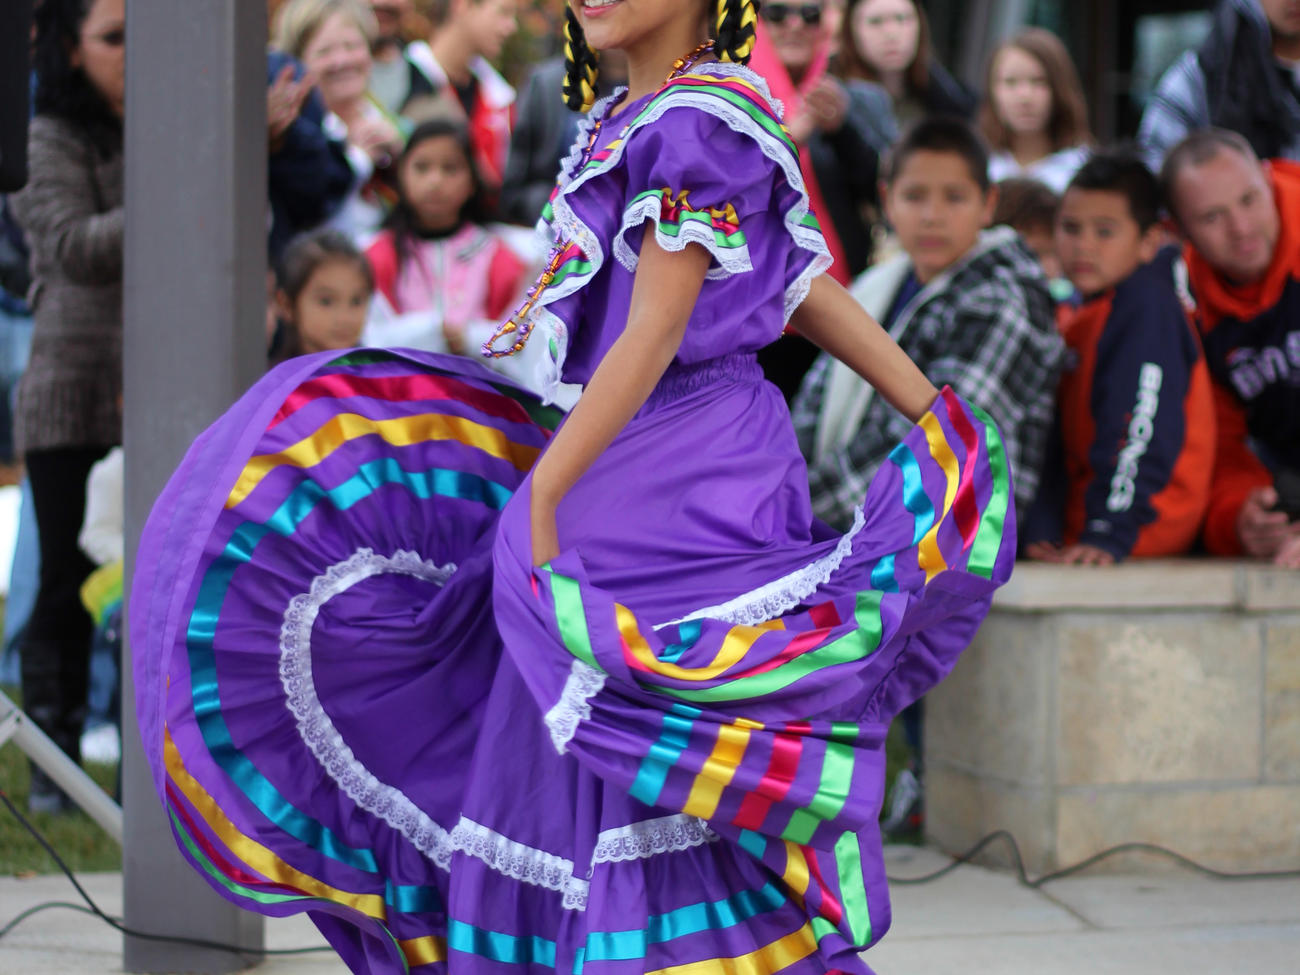 Girl in traditional Mexican purple dress at Day of the Dead event in Longmont, CO